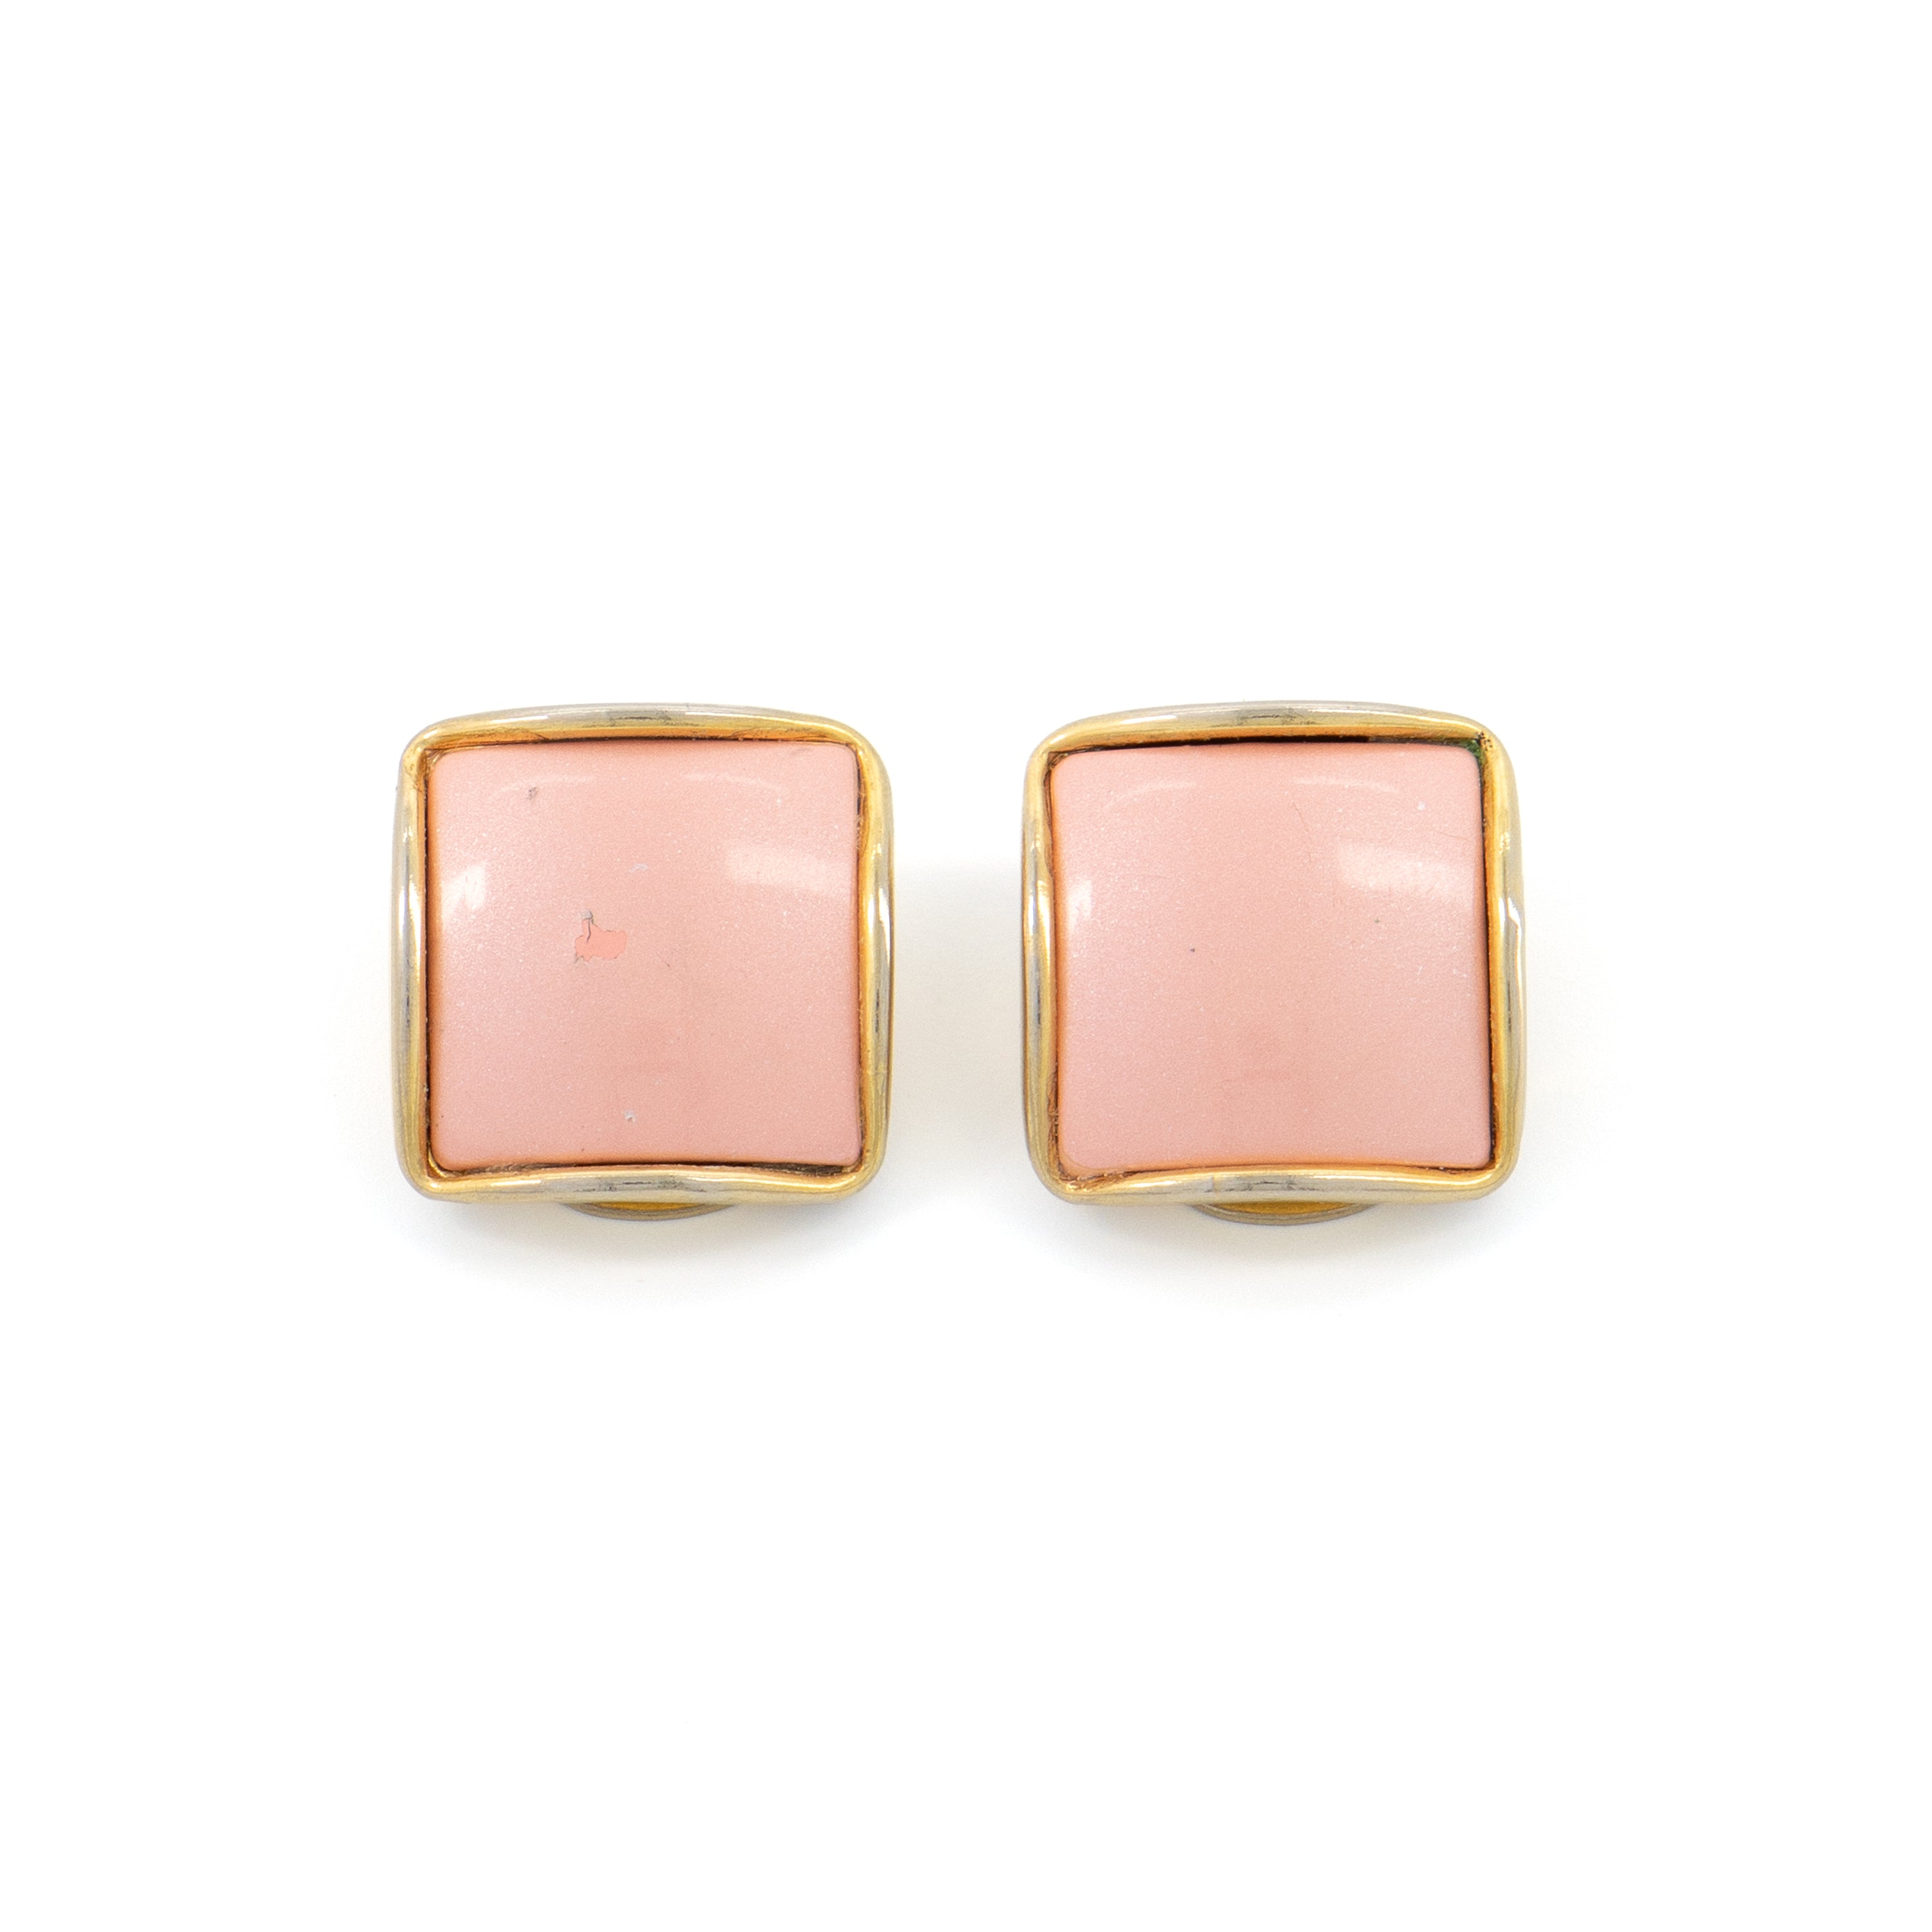 Vintage Anne Klein square earrings in pink enamel with a pearl finish